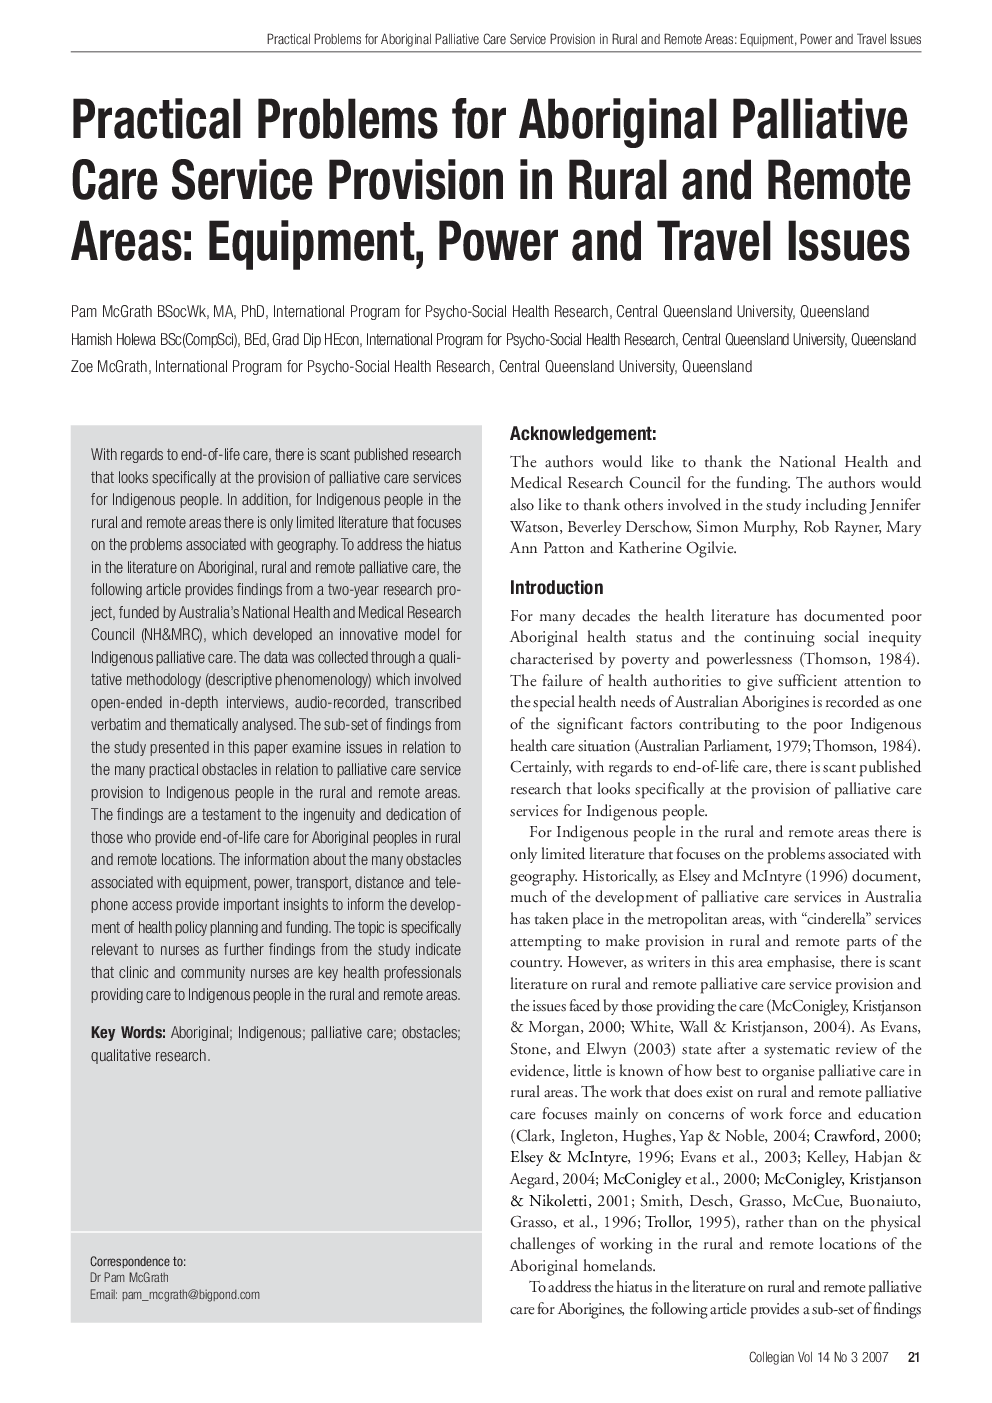 Practical Problems for Aboriginal Palliative Care Service Provision in Rural and Remote Areas: Equipment, Power and Travel Issues